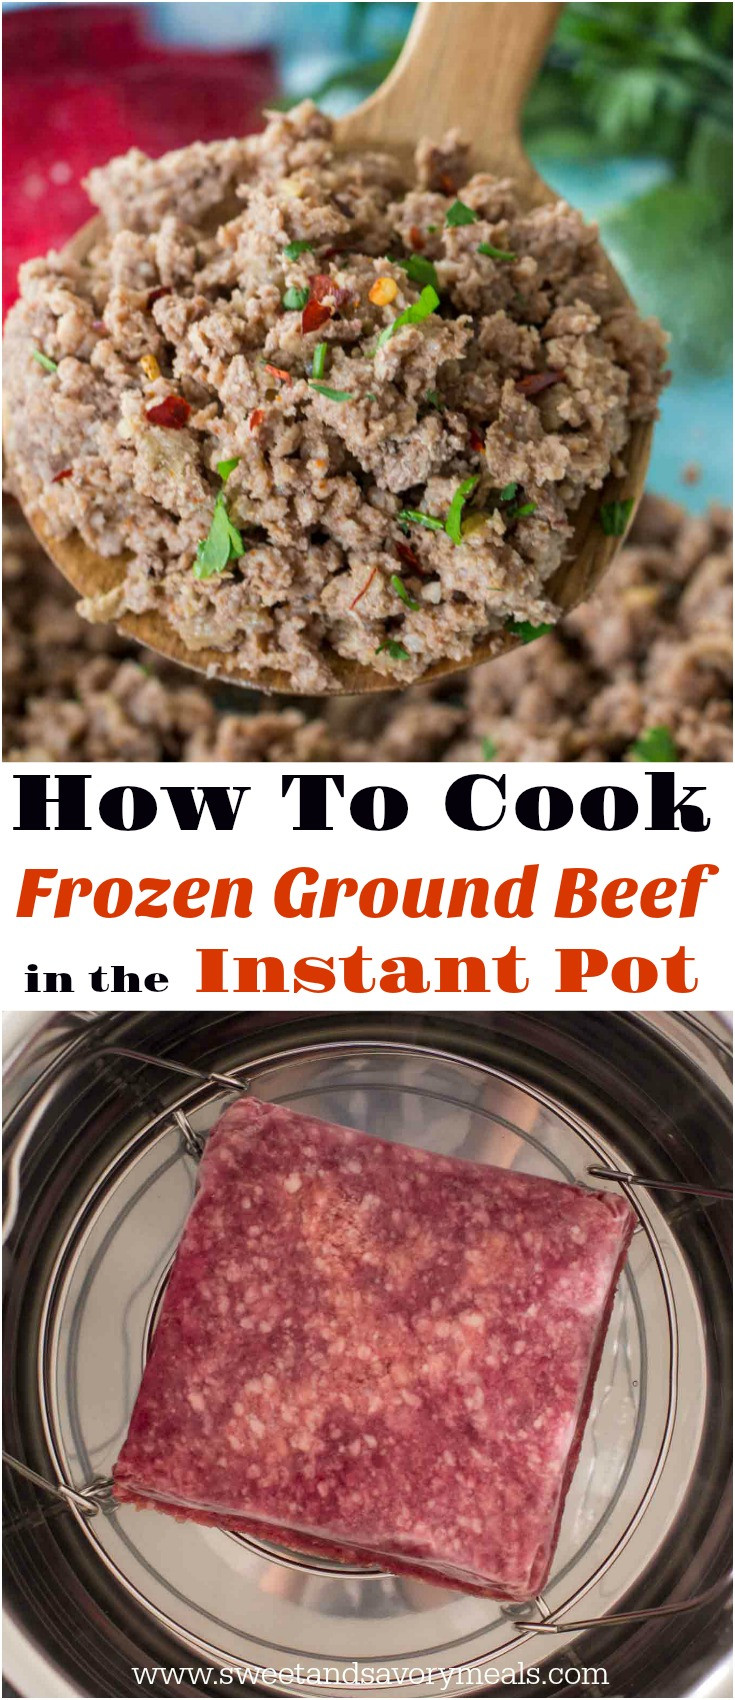 21 Best Cooking Frozen Ground Beef - Best Recipes Ideas and Collections